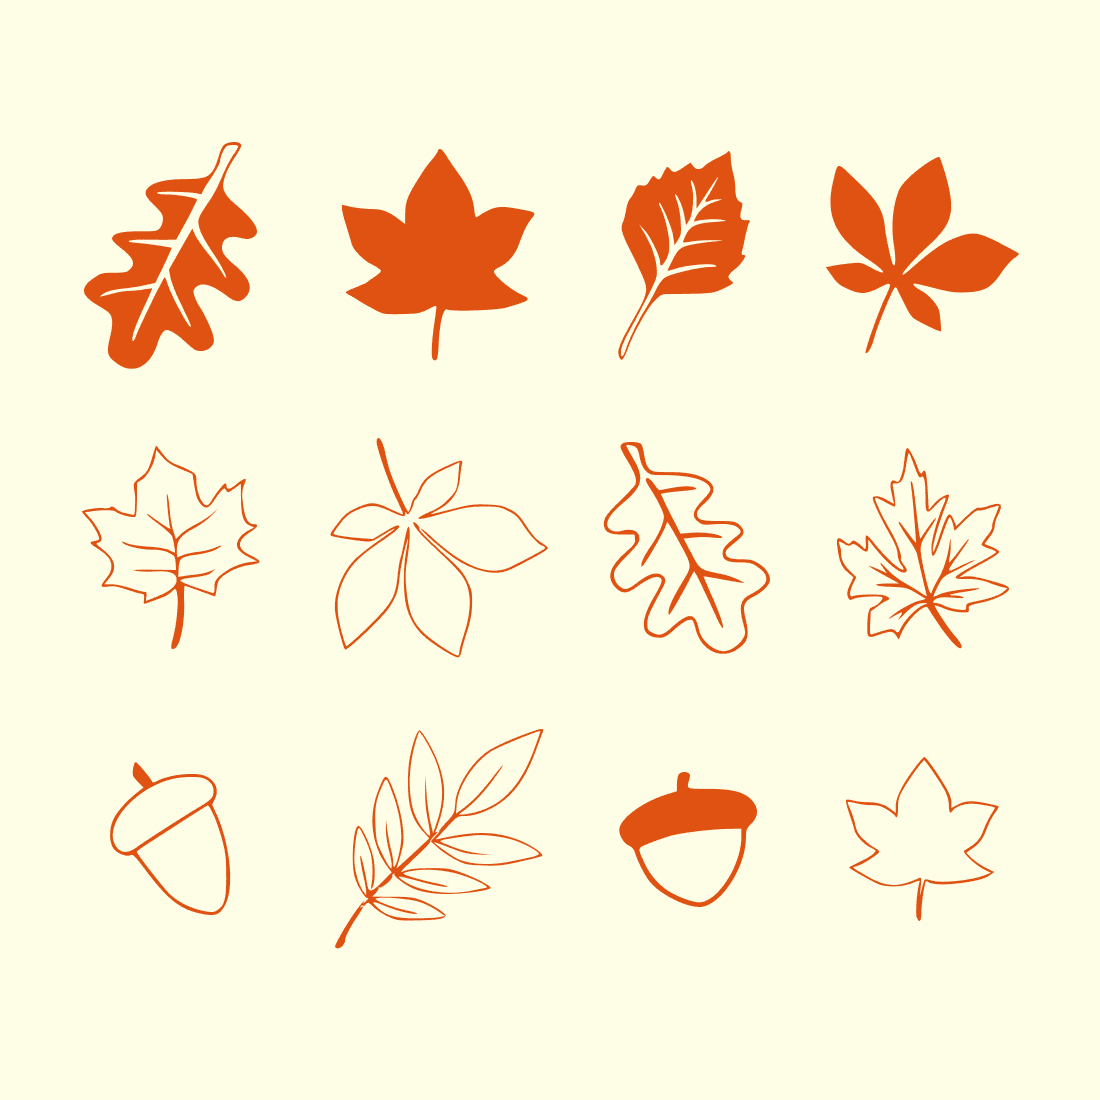 Includes 18 different fall leaves/acorns designs for your projects.